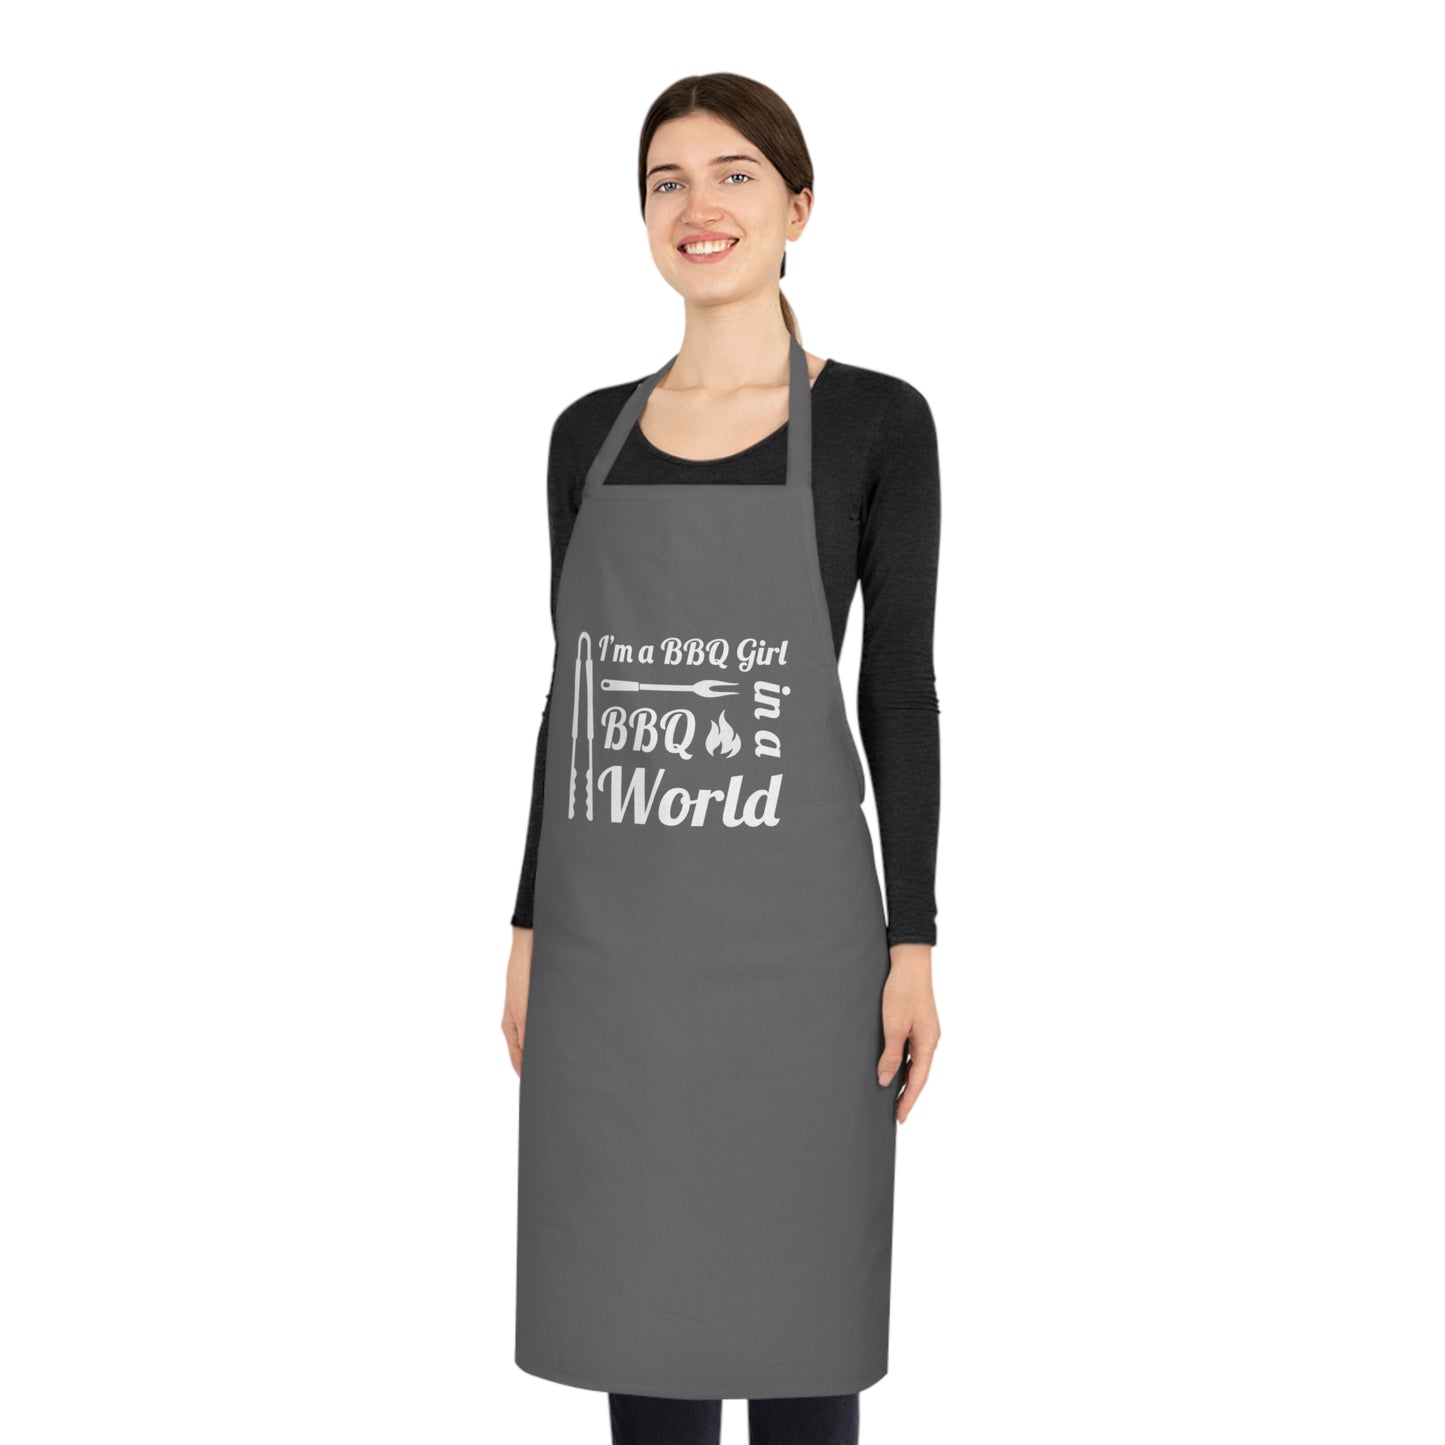 I'm A BBQ Girl in a BBQ World, Cotton Apron